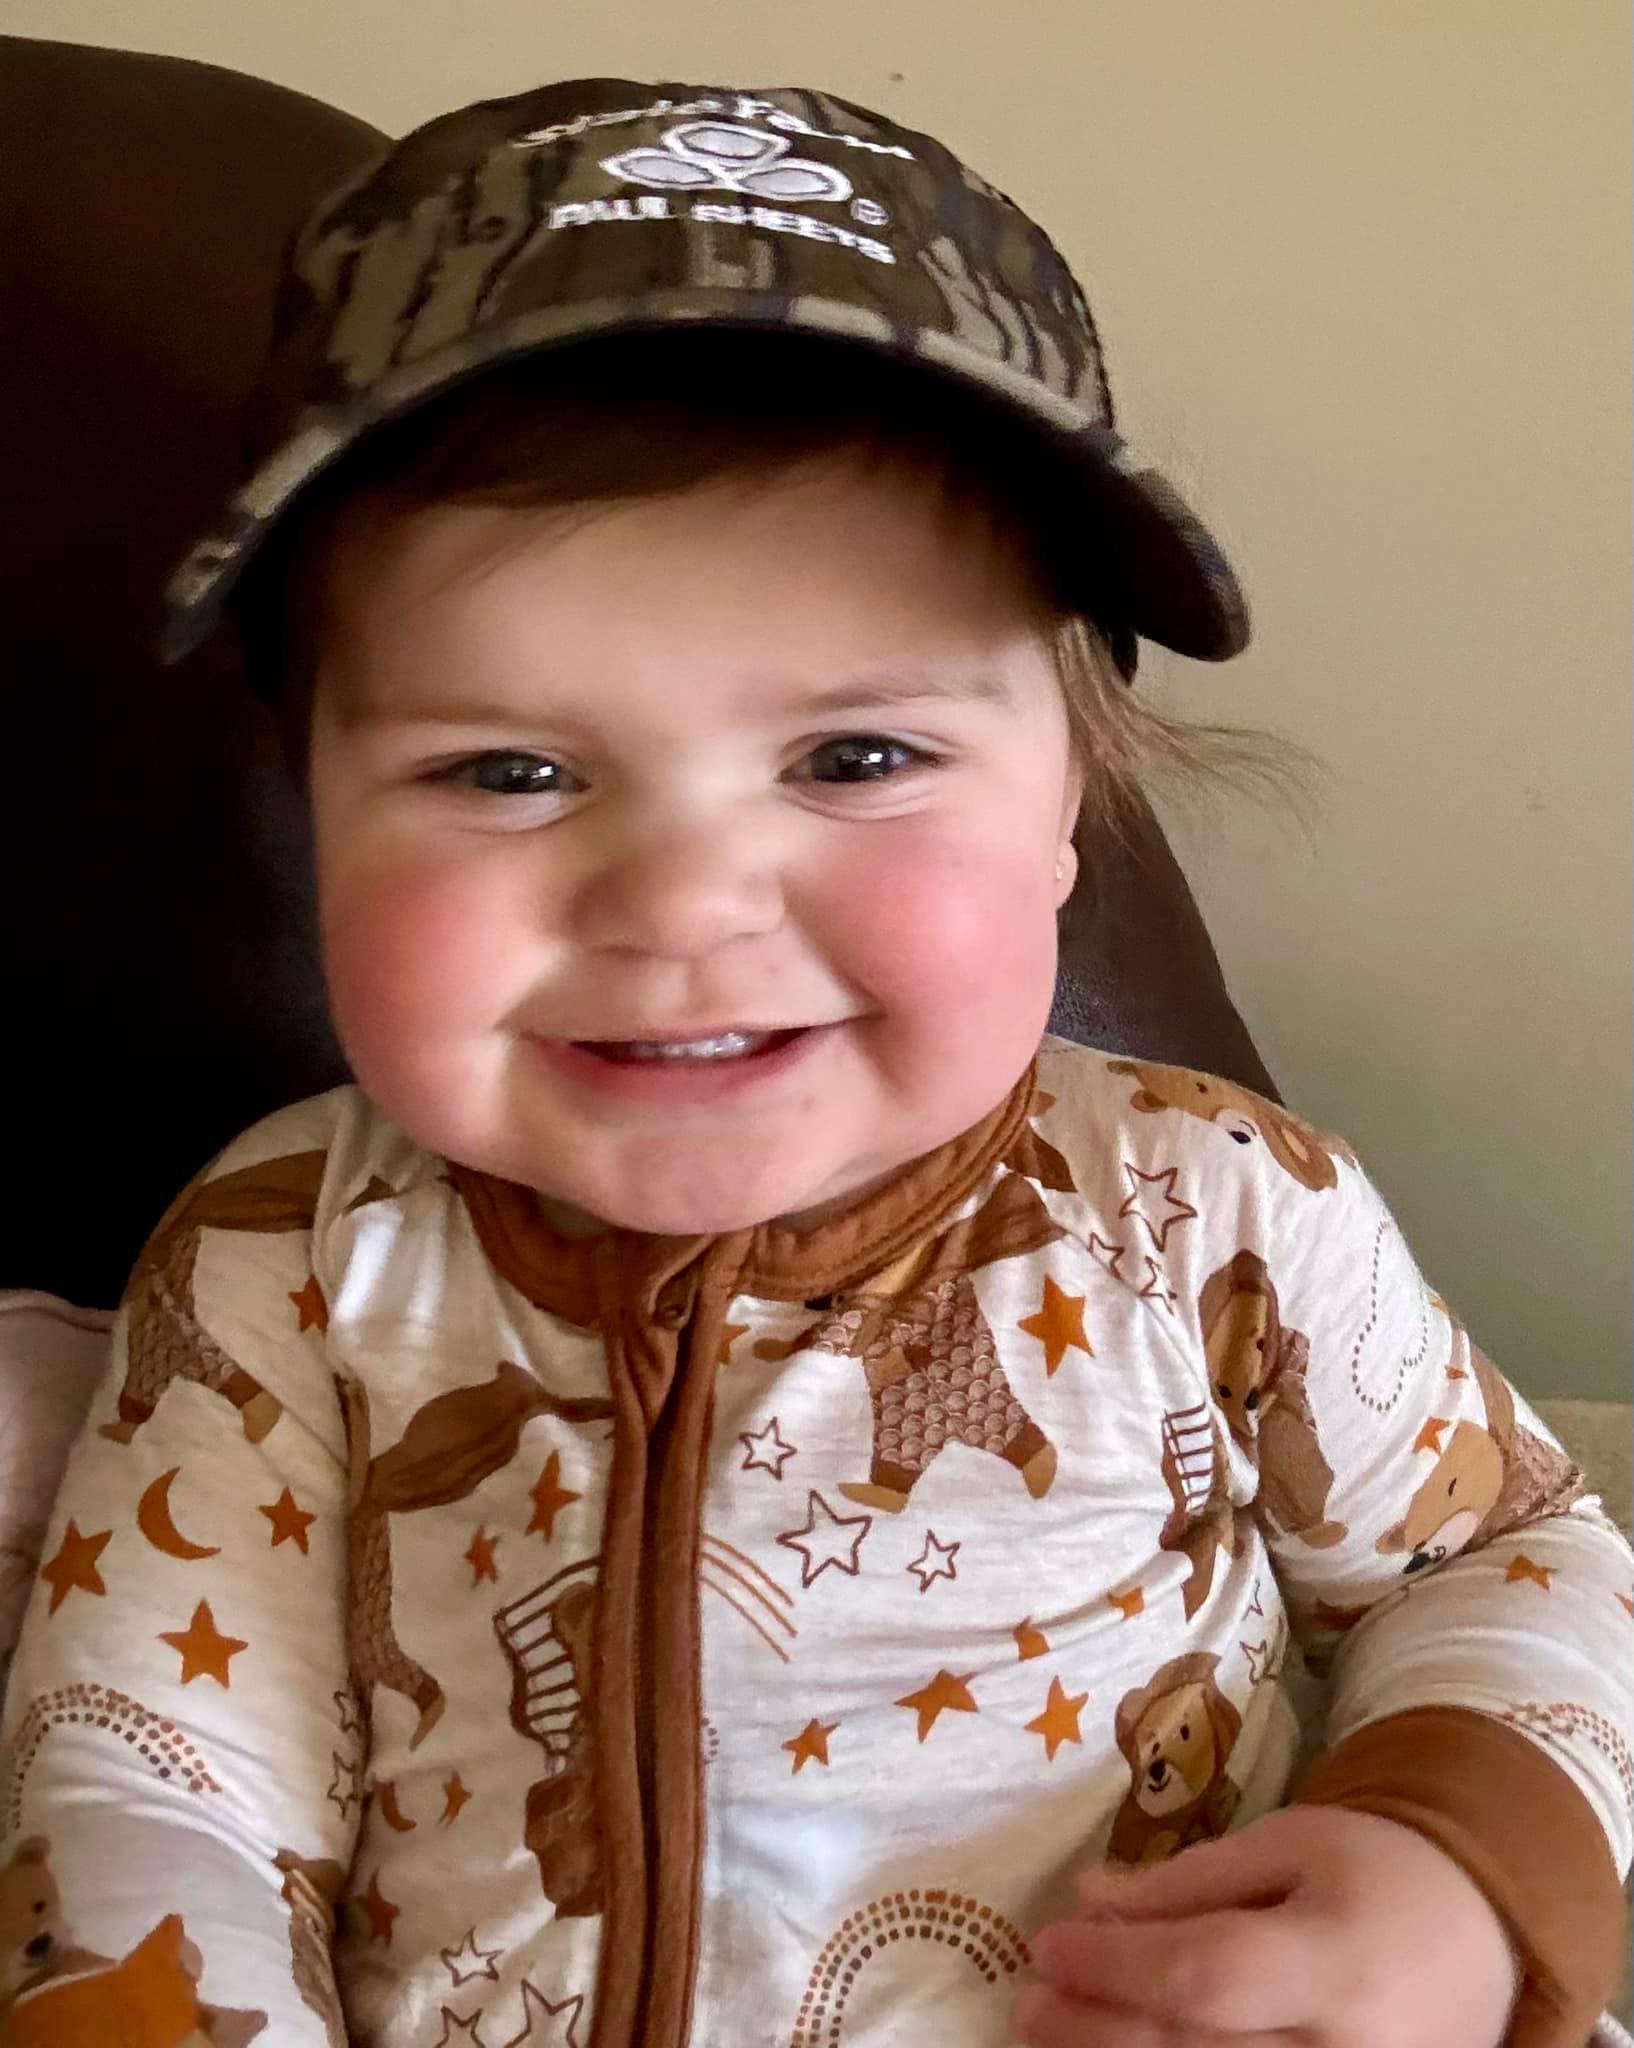 Happy Friday from our hat loving friend, sweet Miss Cora Jayne!  She loves wearing her Paul Sheets camo hat just like her Daddy